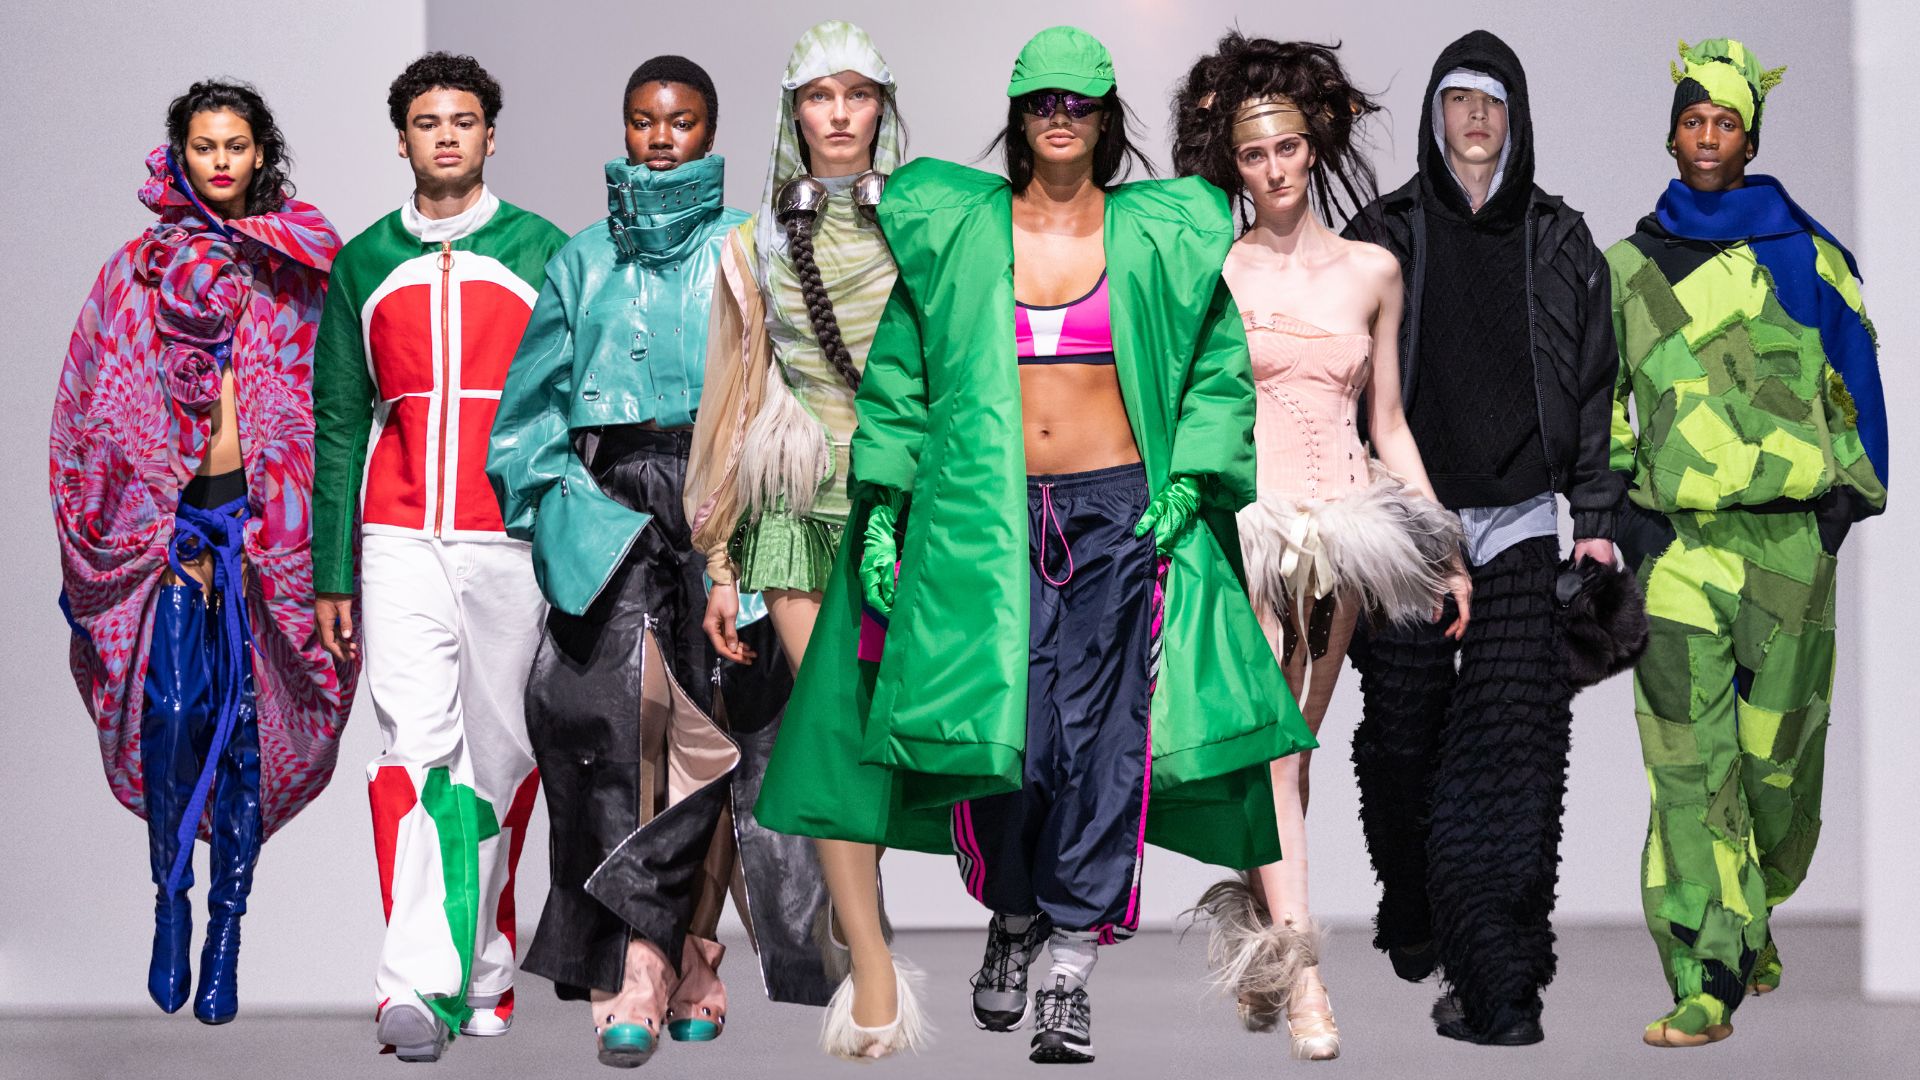 The Fashion Standard: University of Westminster Fashion Show